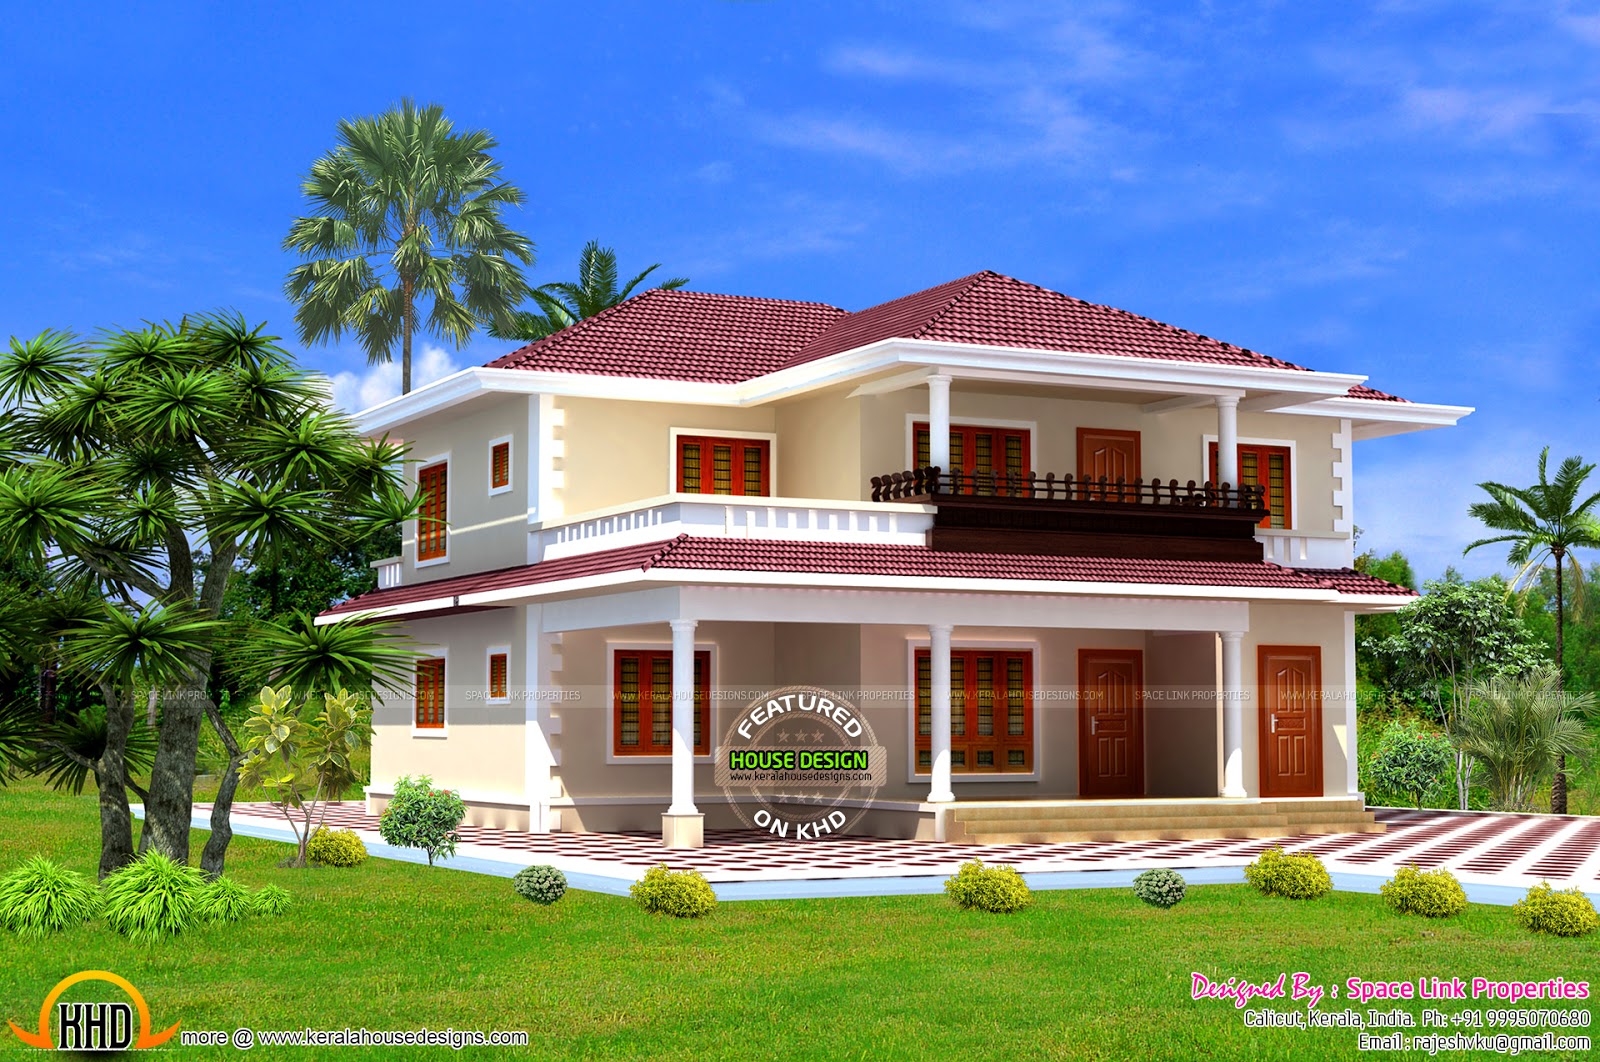 Awesome looking typical Kerala  model  house  Kerala  home  